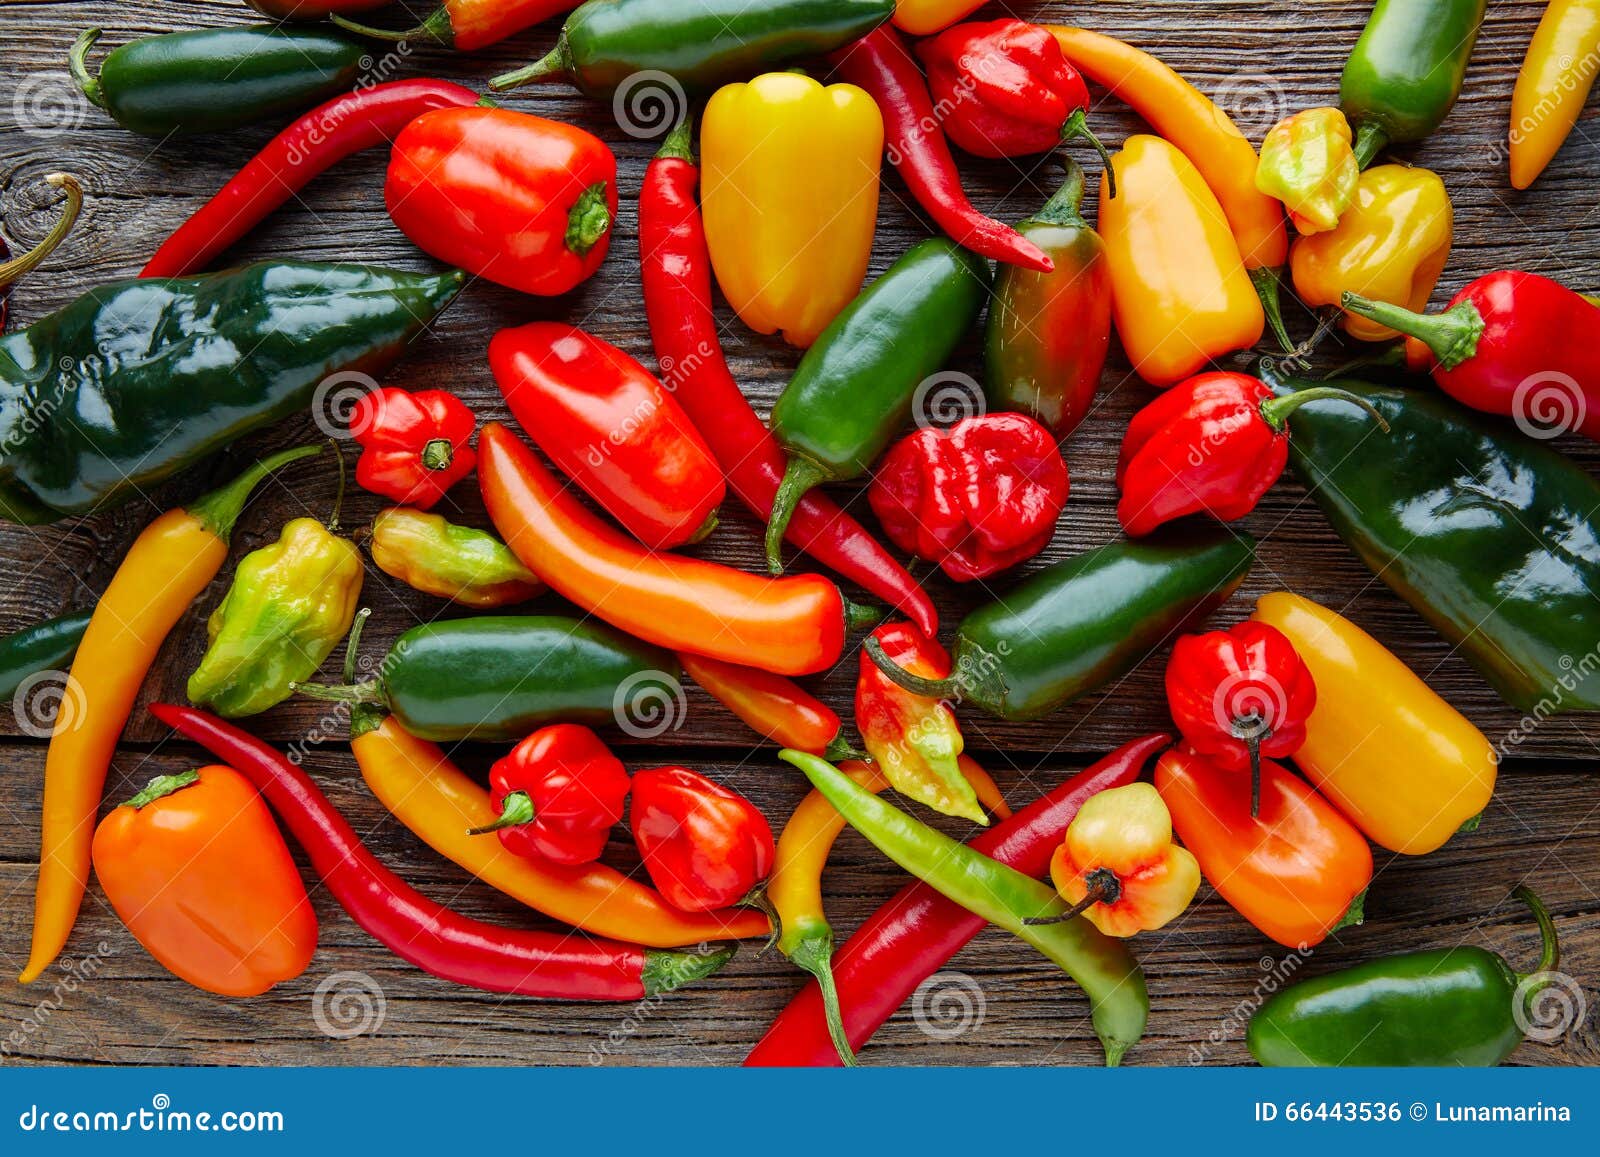 mexican hot chili peppers colorful mix